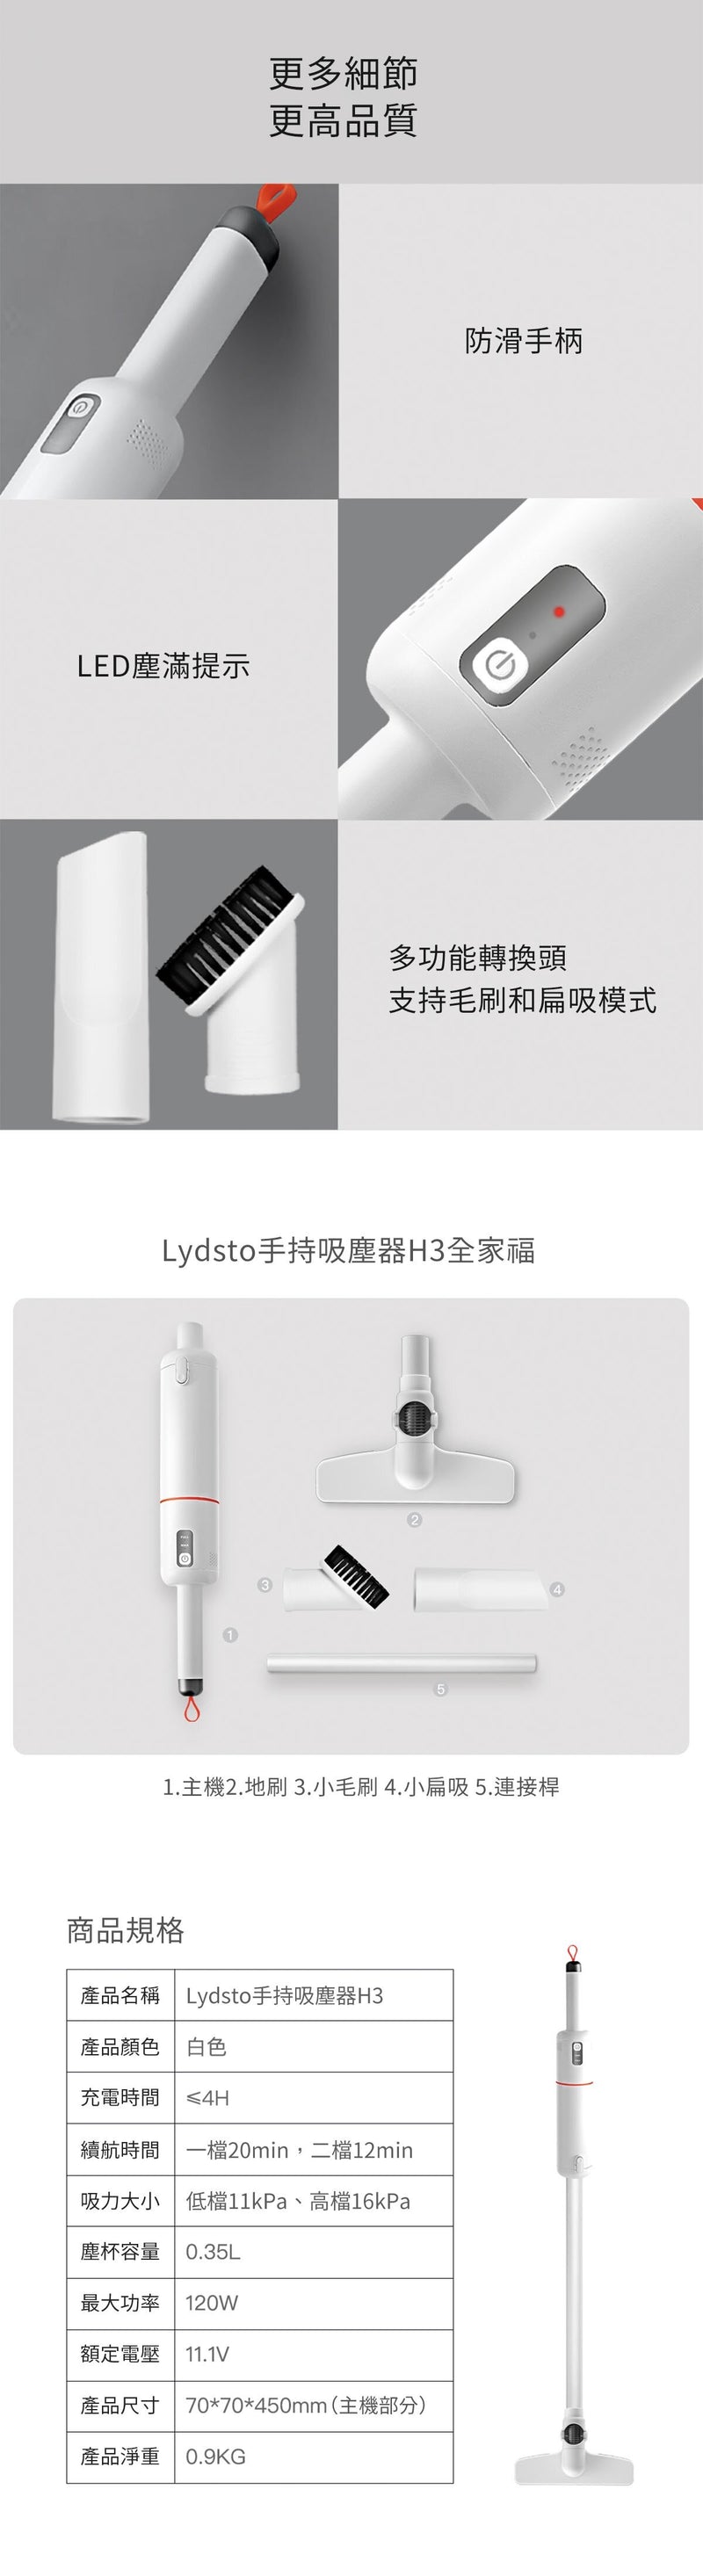 Lydsto - H3 Cordless Portable Vacuum Cleaner｜Handheld Vacuum Cleaner｜16000Pa｜Small｜Car Vacuum Cleaner